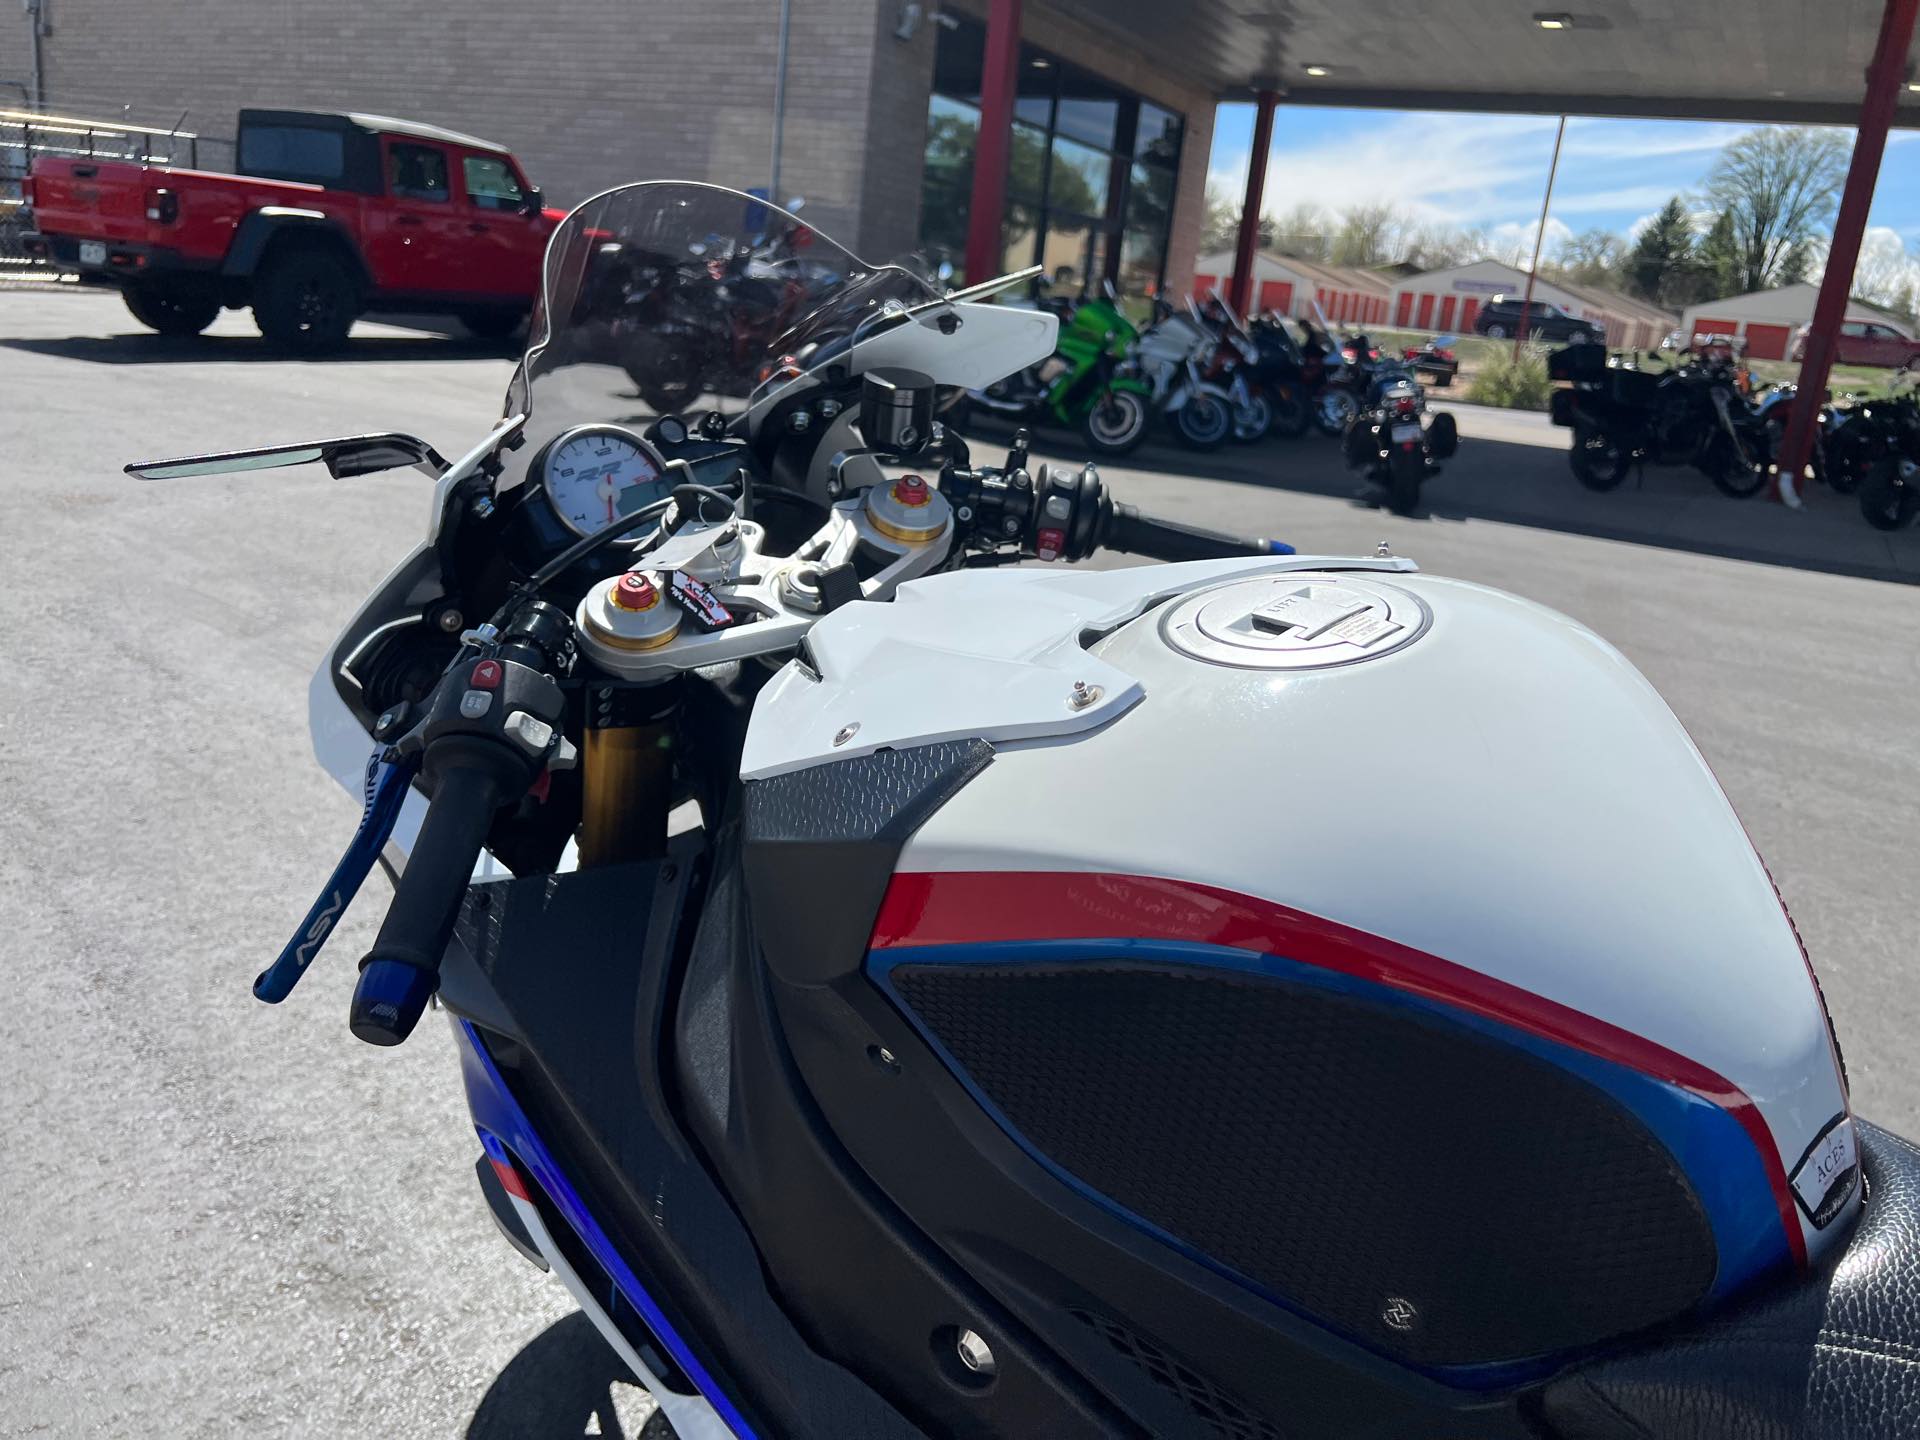 2013 BMW S 1000 RR at Aces Motorcycles - Fort Collins